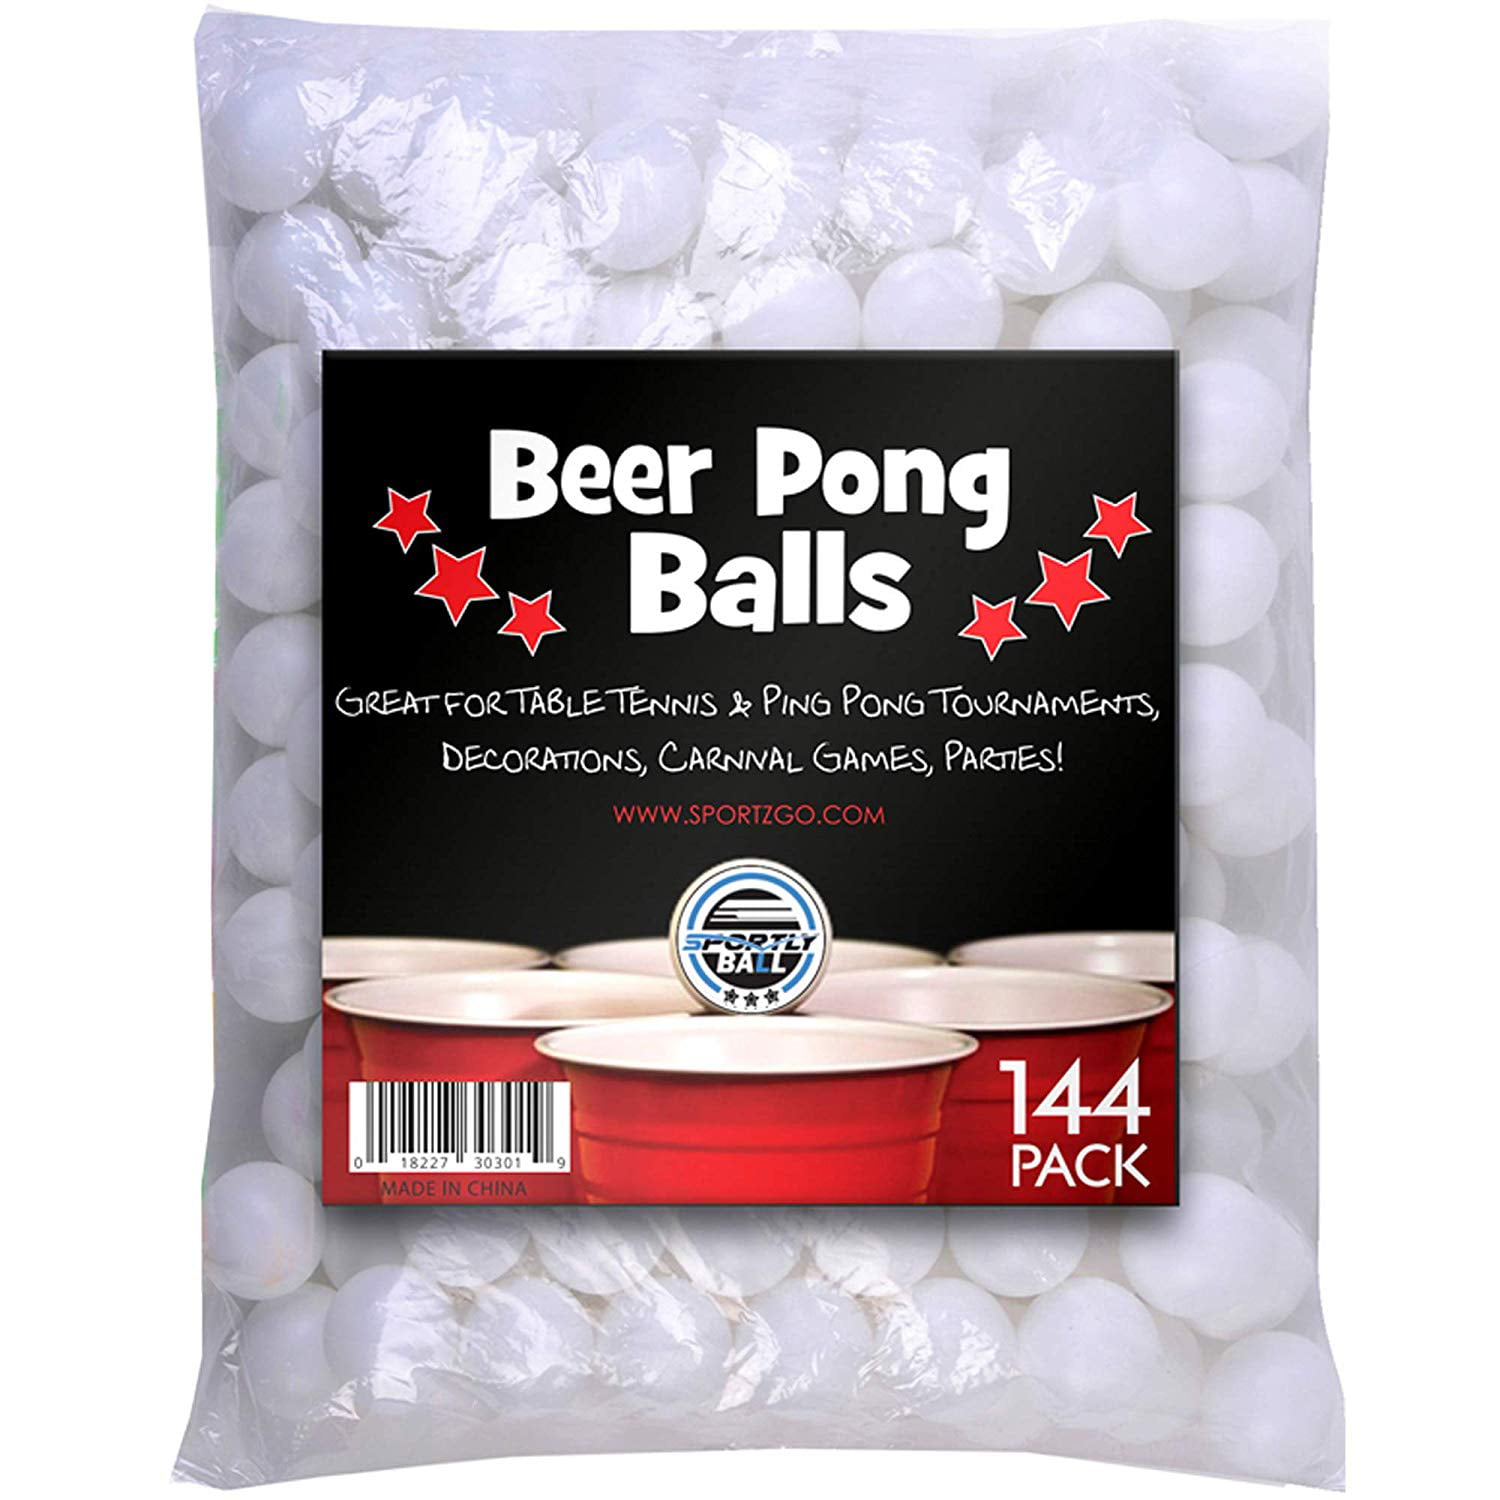 List 95+ Images where can i buy a beer party ball Stunning